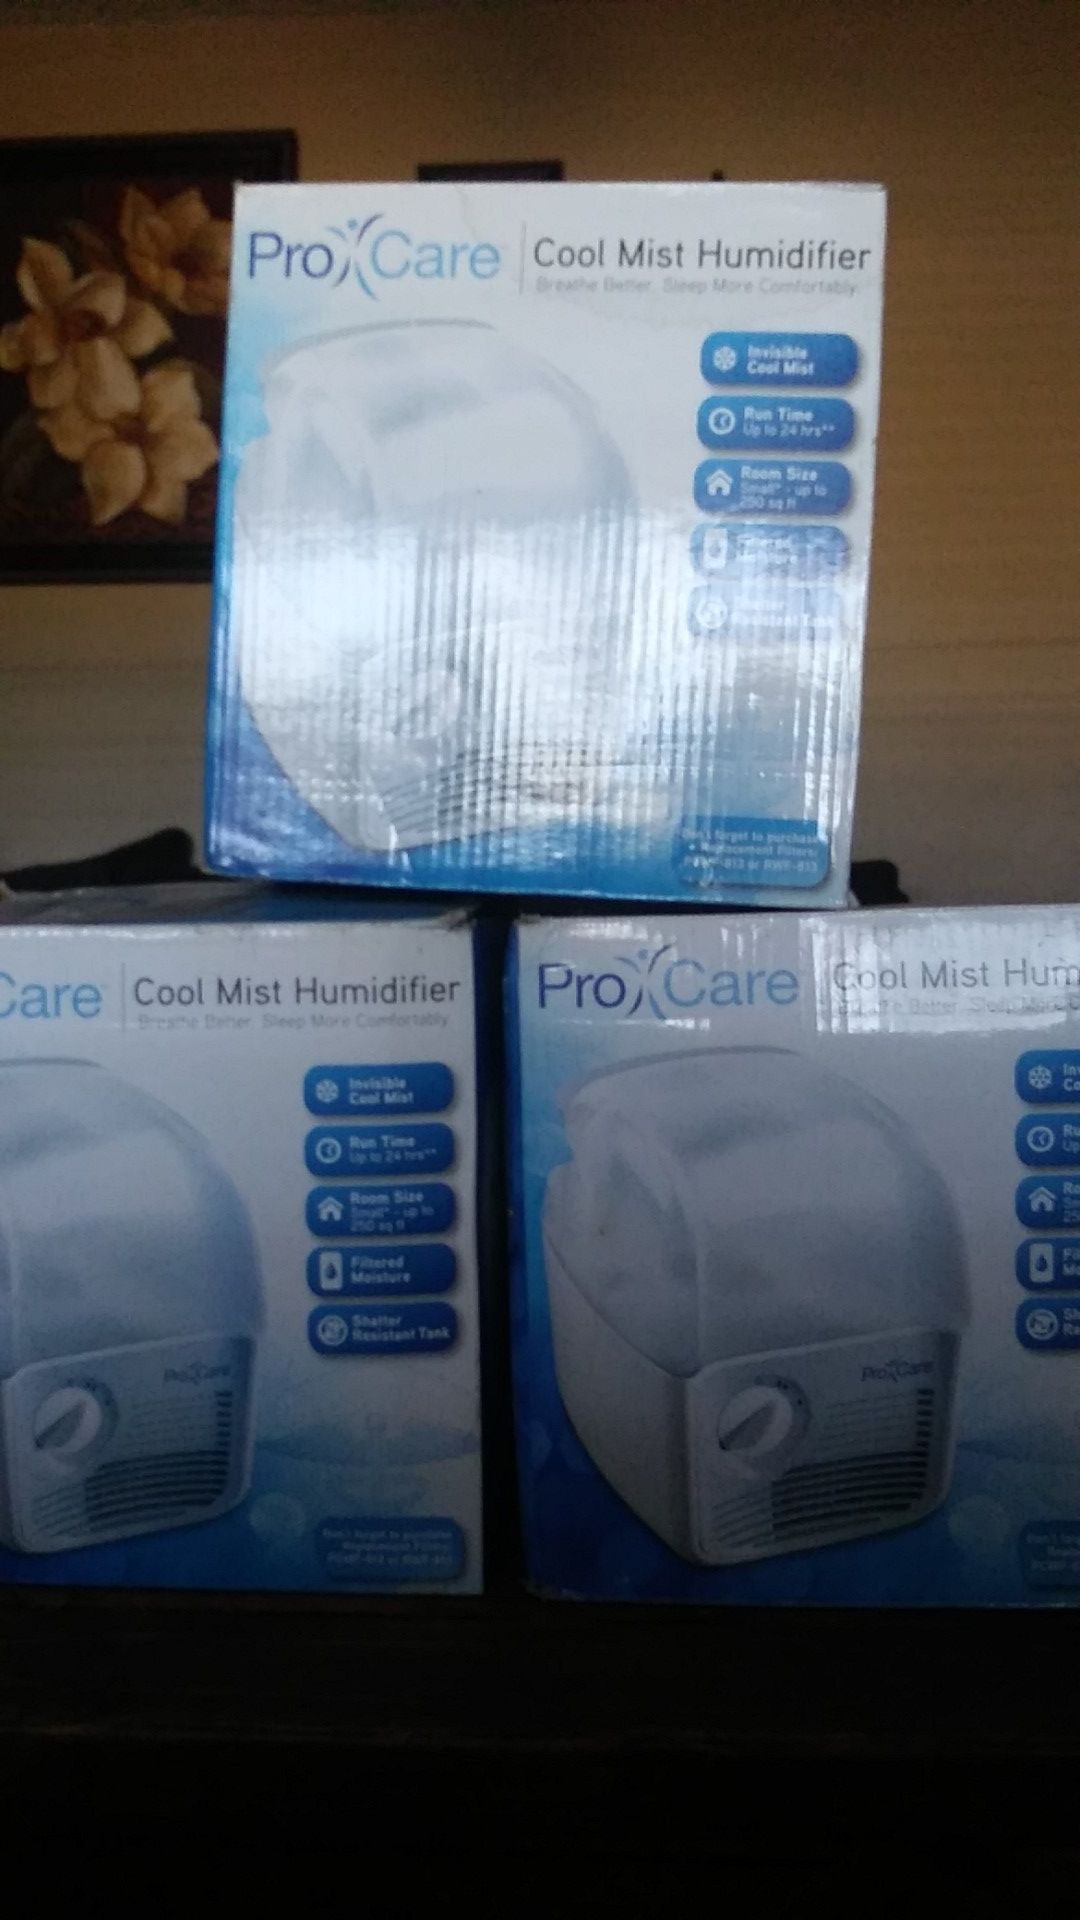 Cool mist humidifier